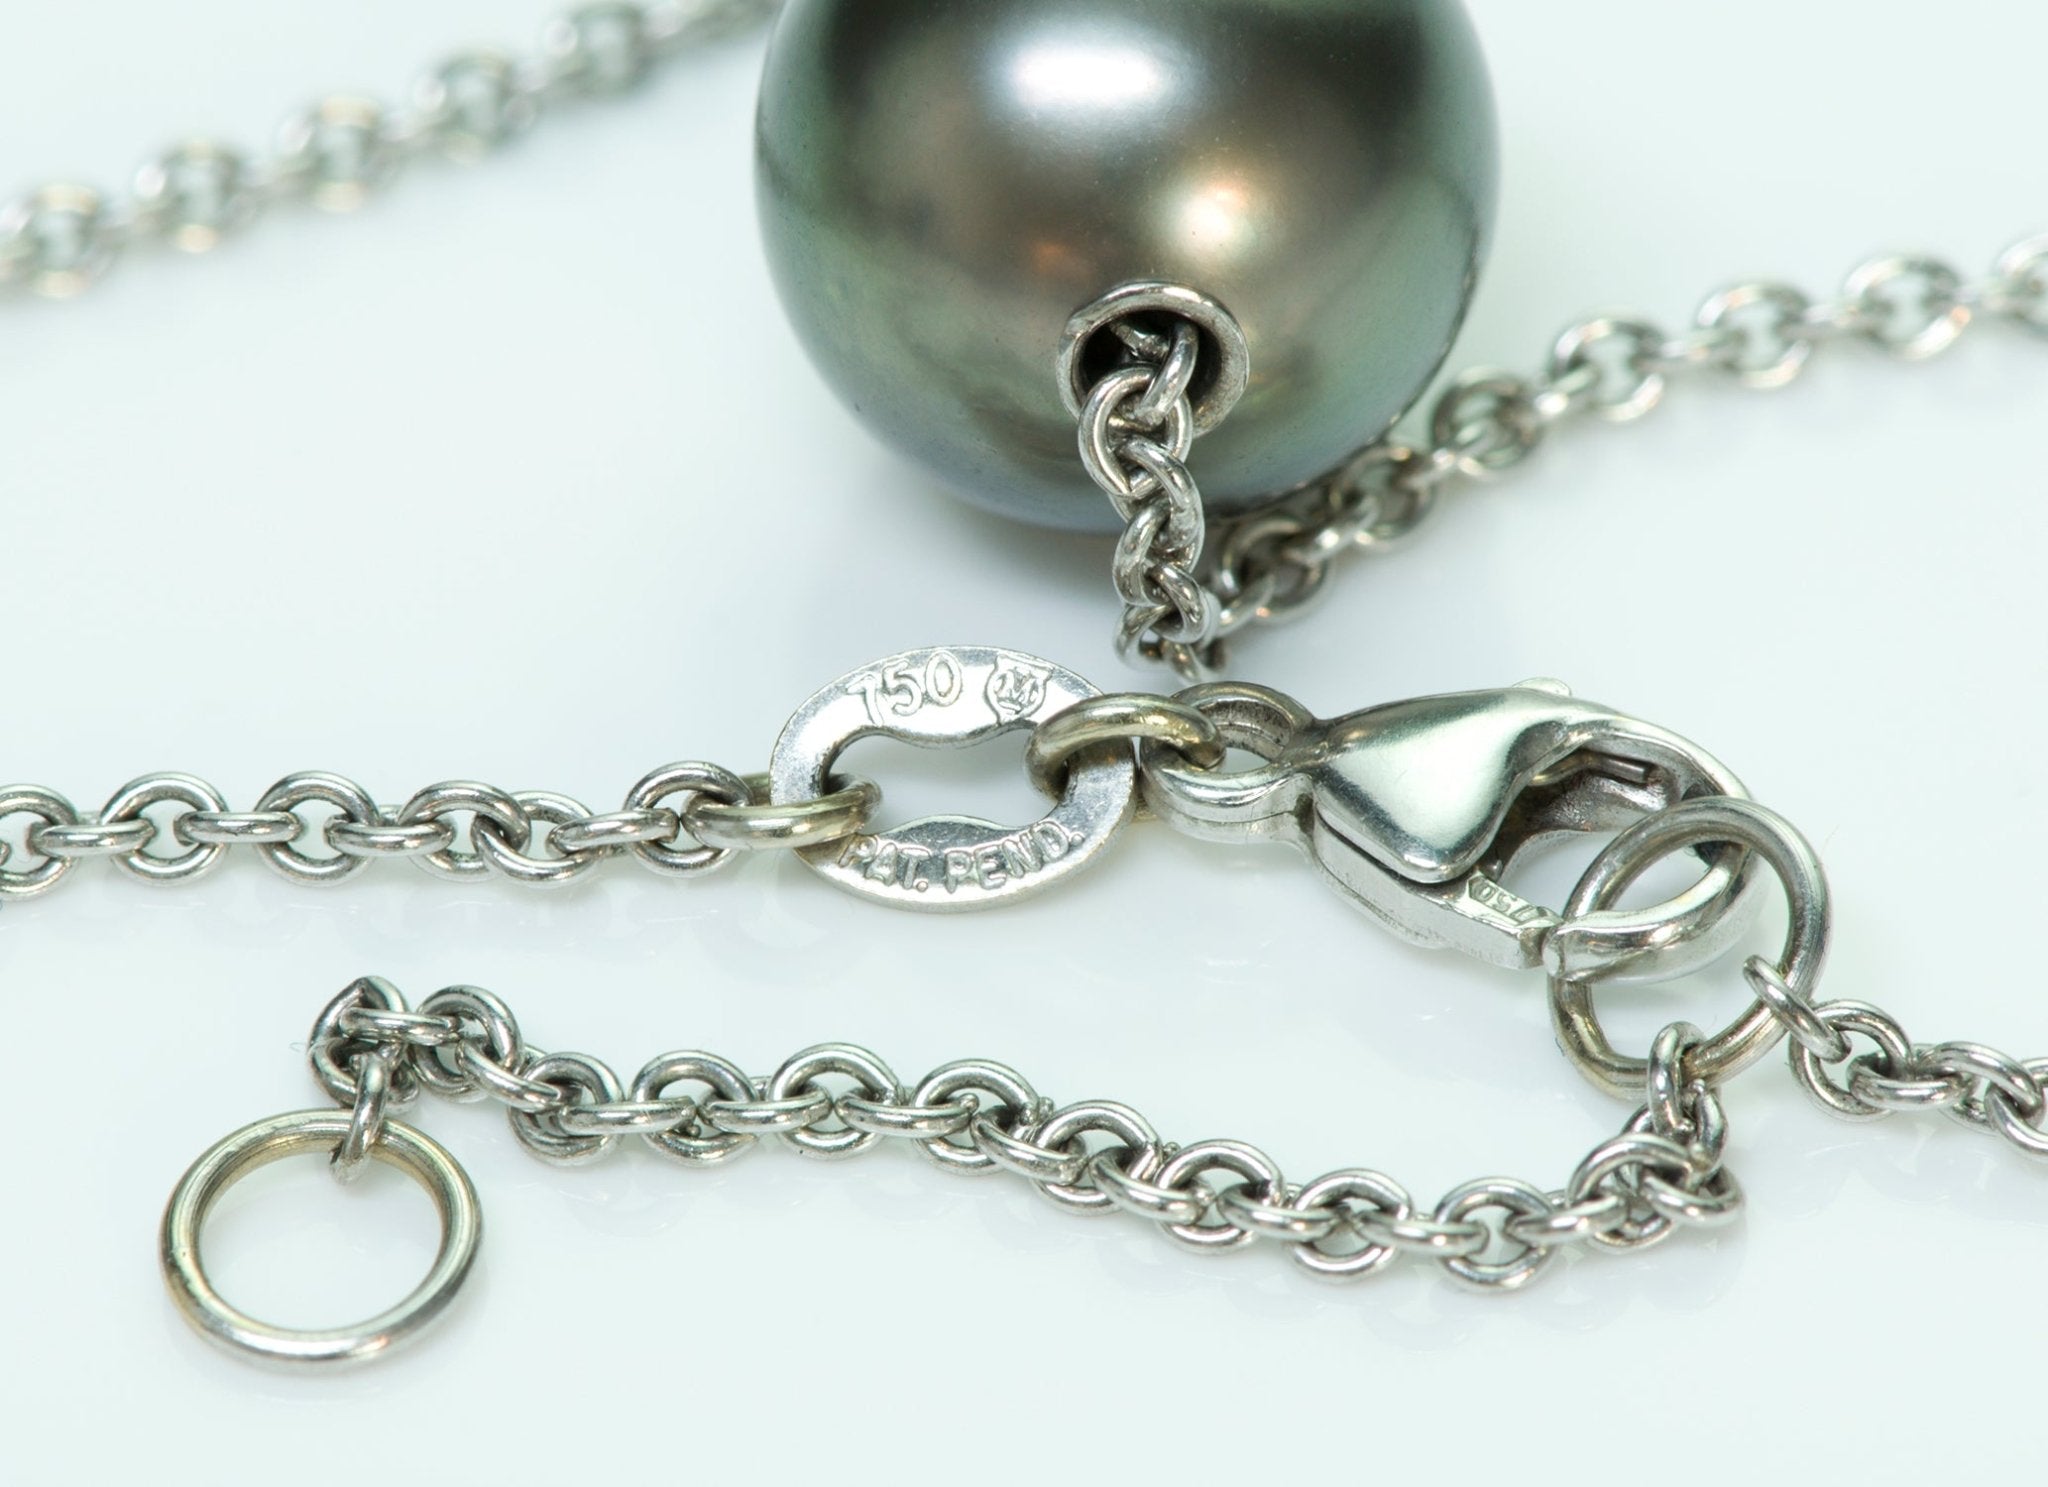 Mikimoto Pearls in Motion 18K Gold Necklace